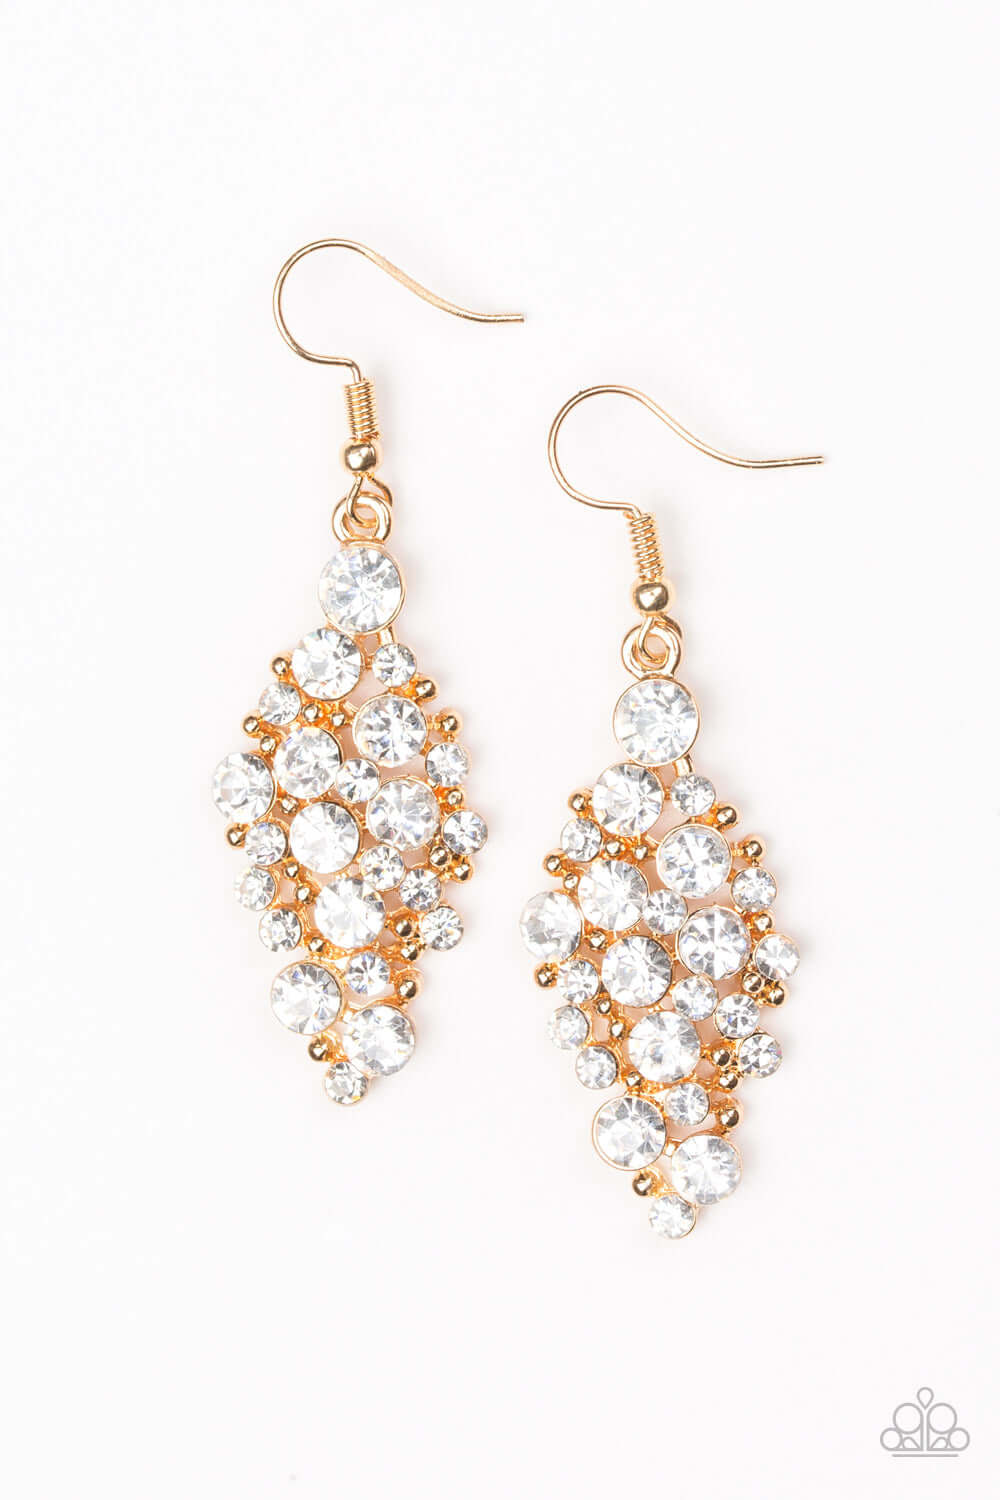 Cosmically Chic Gold Earrings - TheMasterCollection